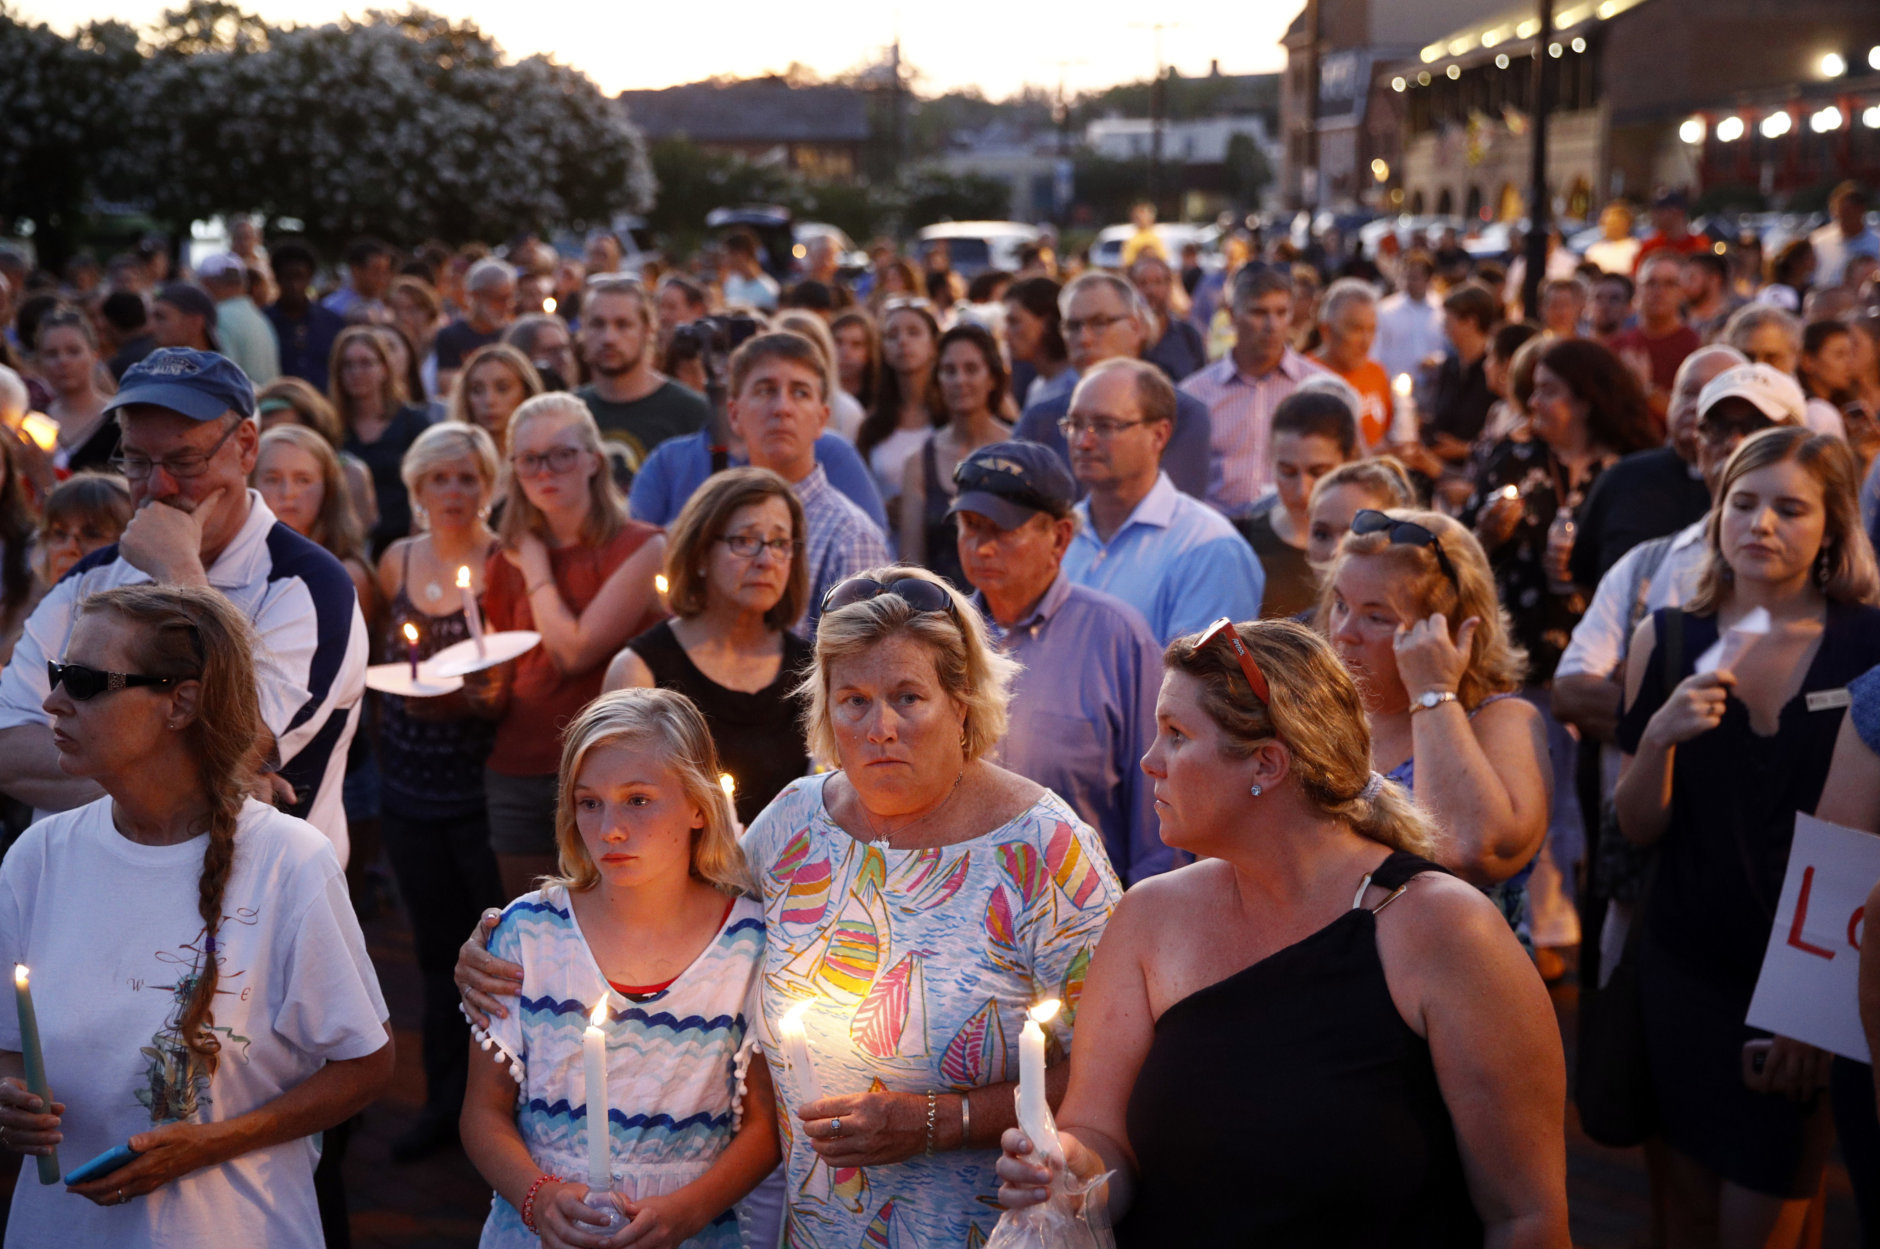 Mourners stand in silence during a vigil in response to a shooting at the Capital Gazette newsroom, Friday, June 29, 2018, in Annapolis, Md. Prosecutors say 38-year-old Jarrod W. Ramos opened fire Thursday in the newsroom. (AP Photo/Patrick Semansky)